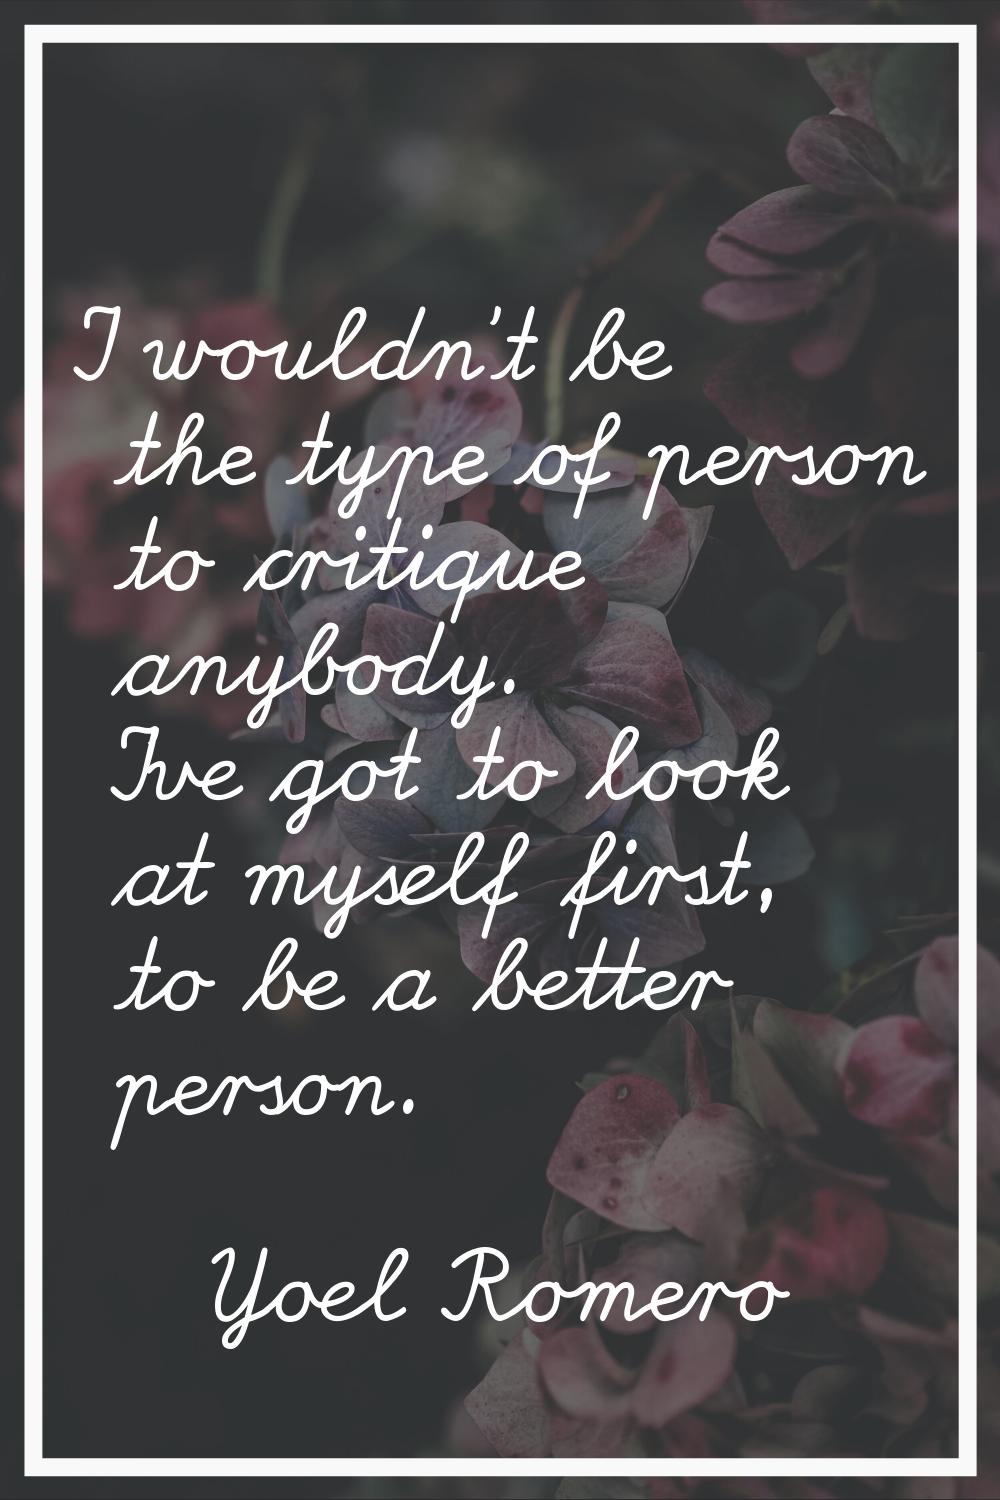 I wouldn't be the type of person to critique anybody. I've got to look at myself first, to be a bet